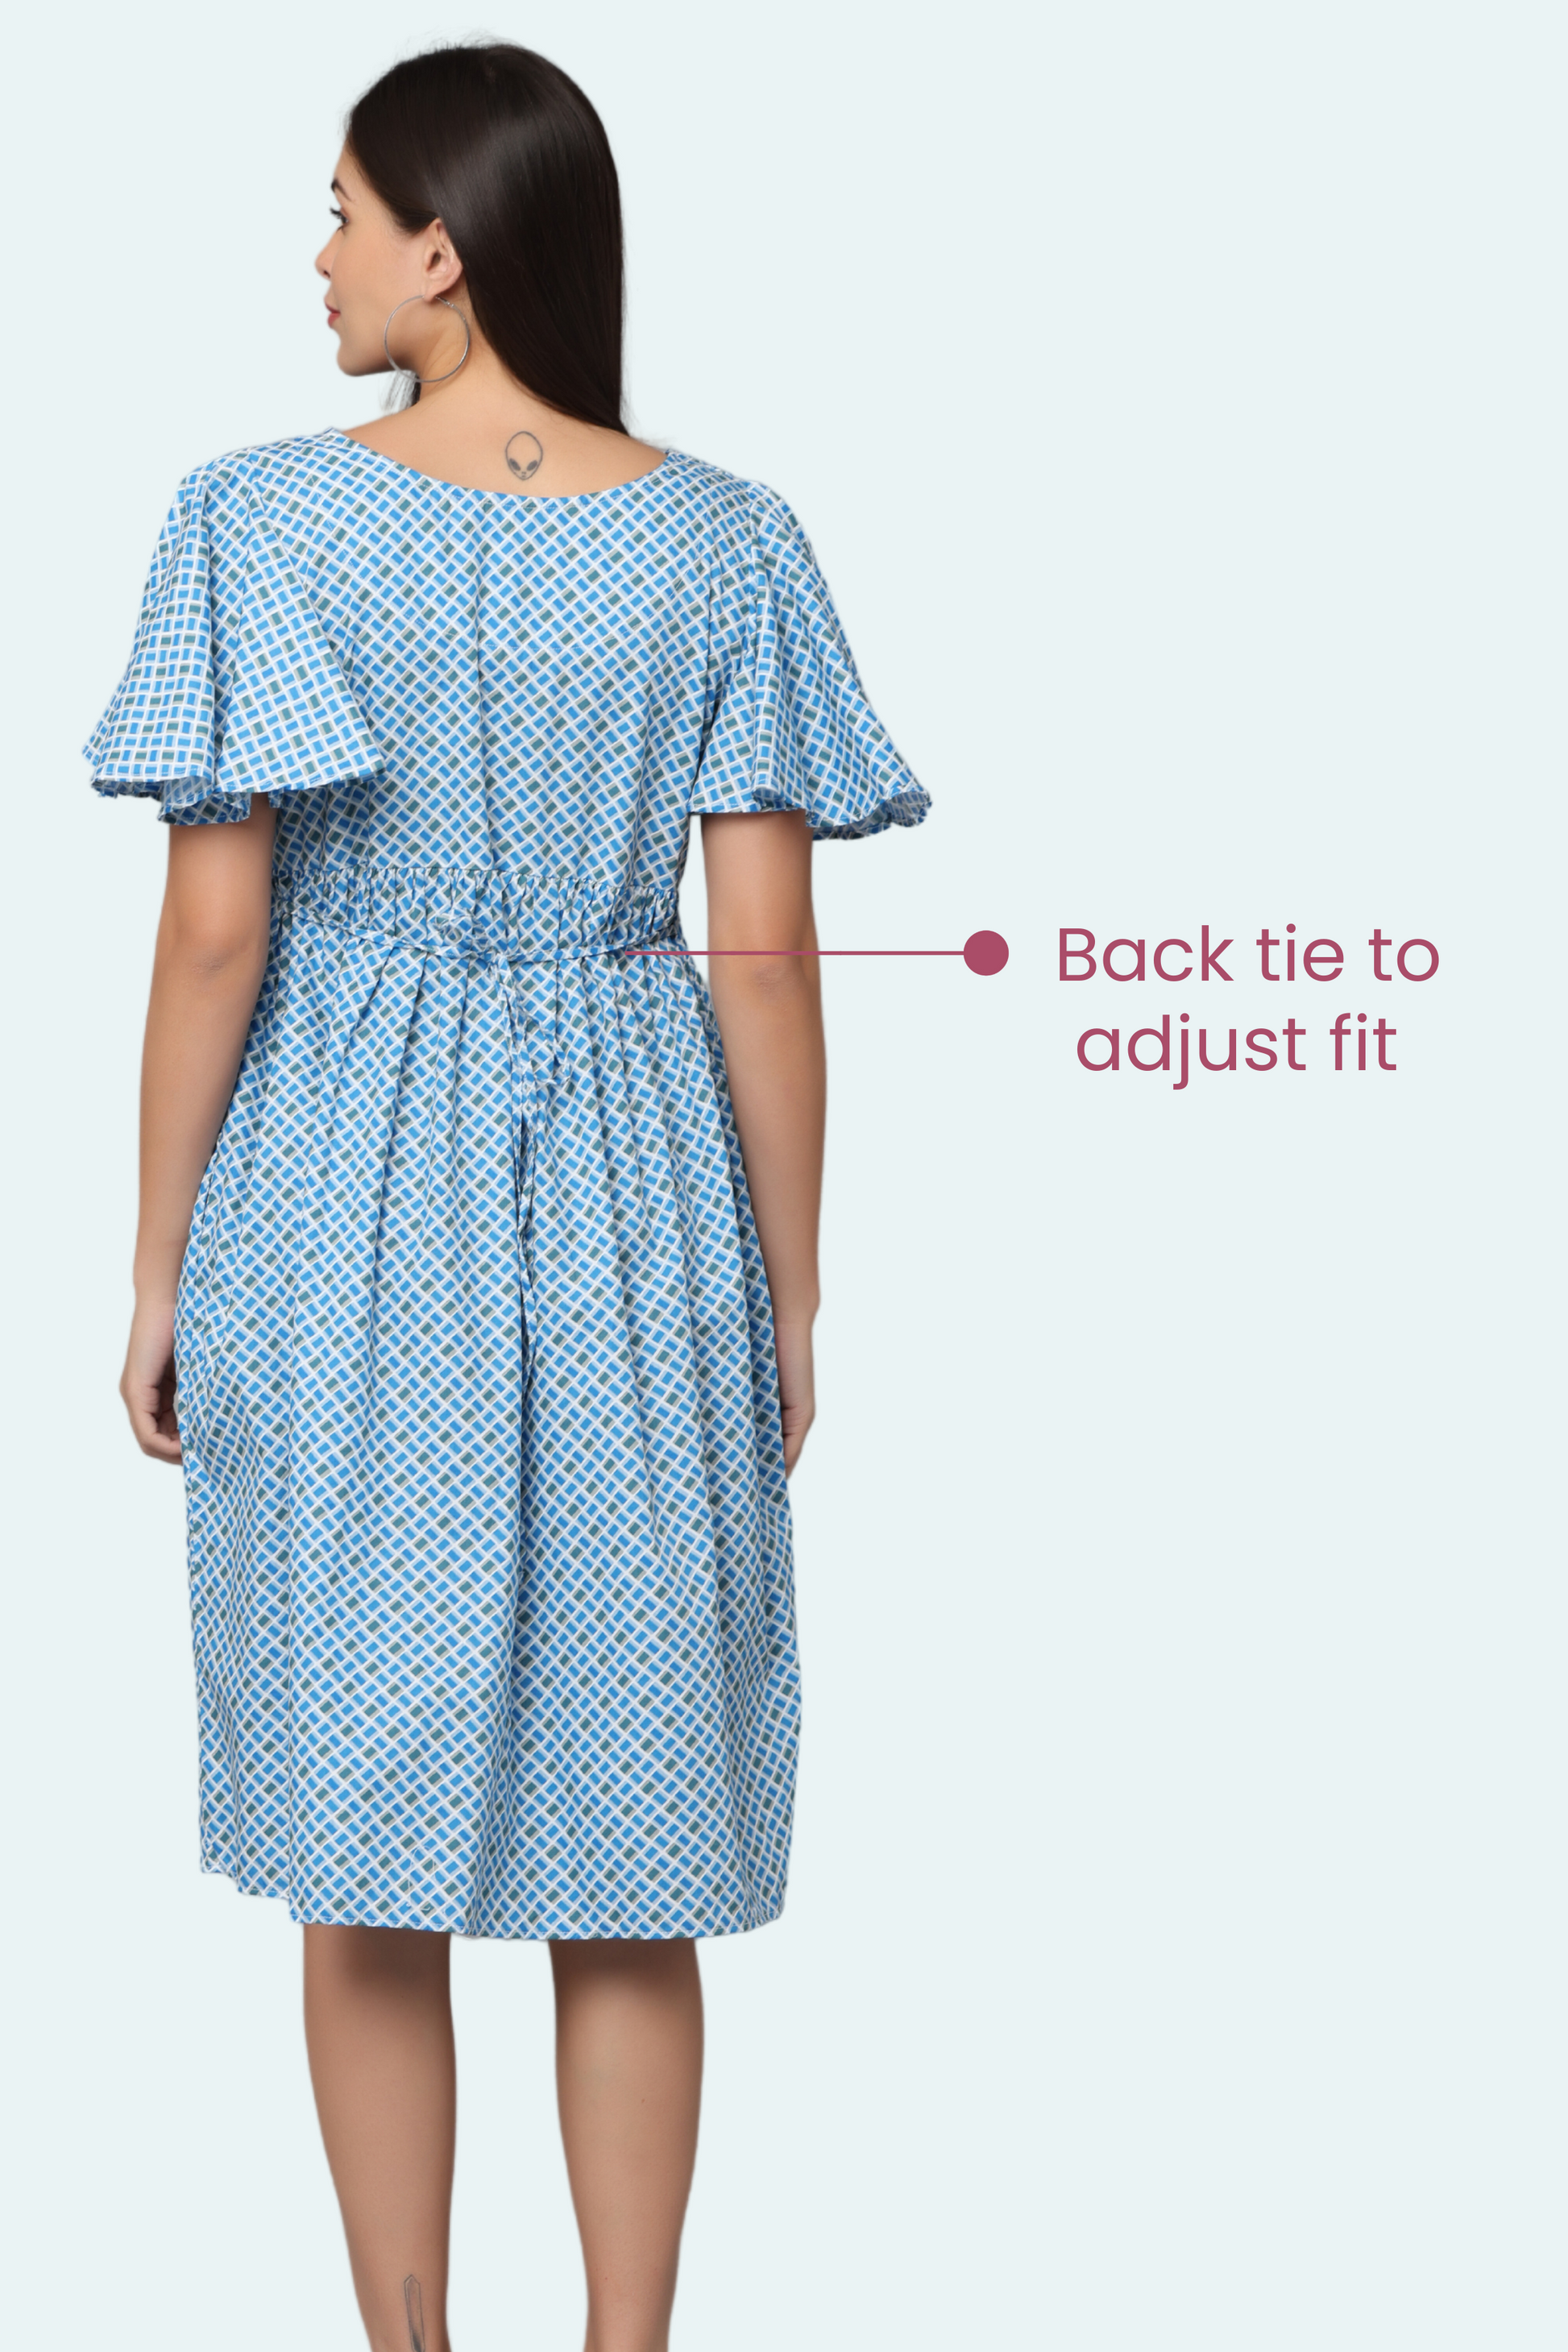 Feeding Dress With Back Tie To Adjust Fit